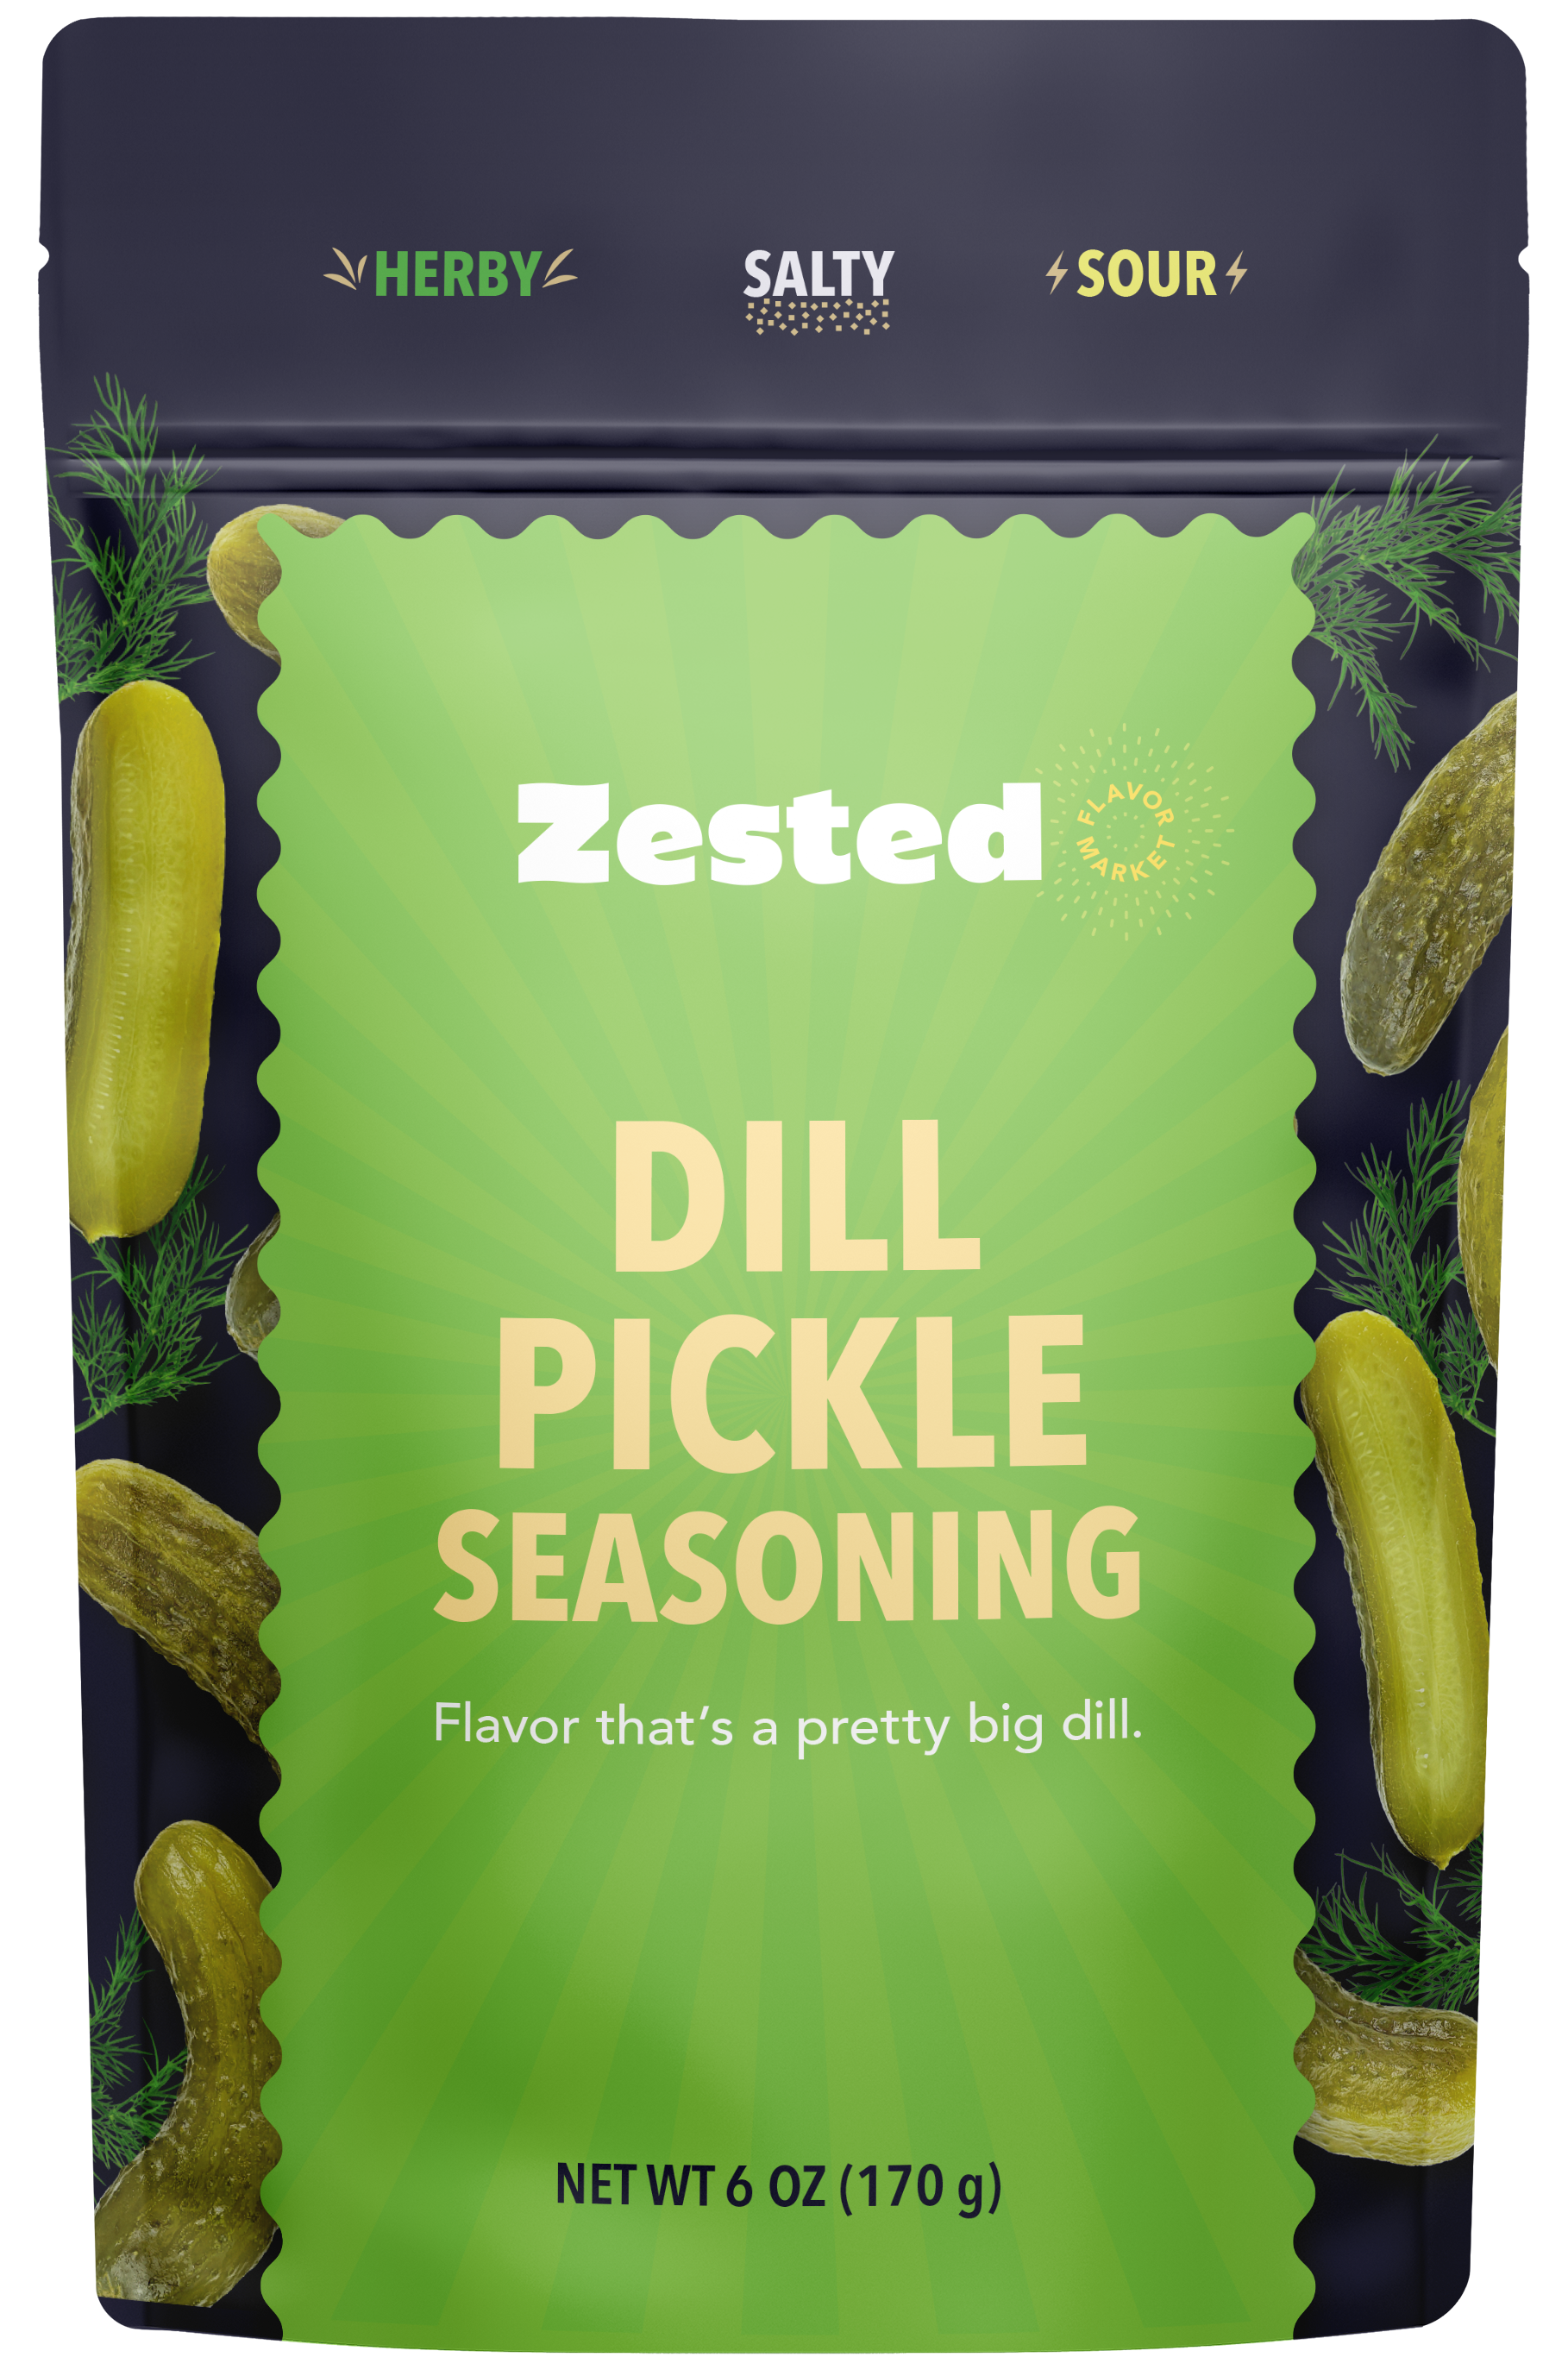 Zested-Dill_Pickle-6oz